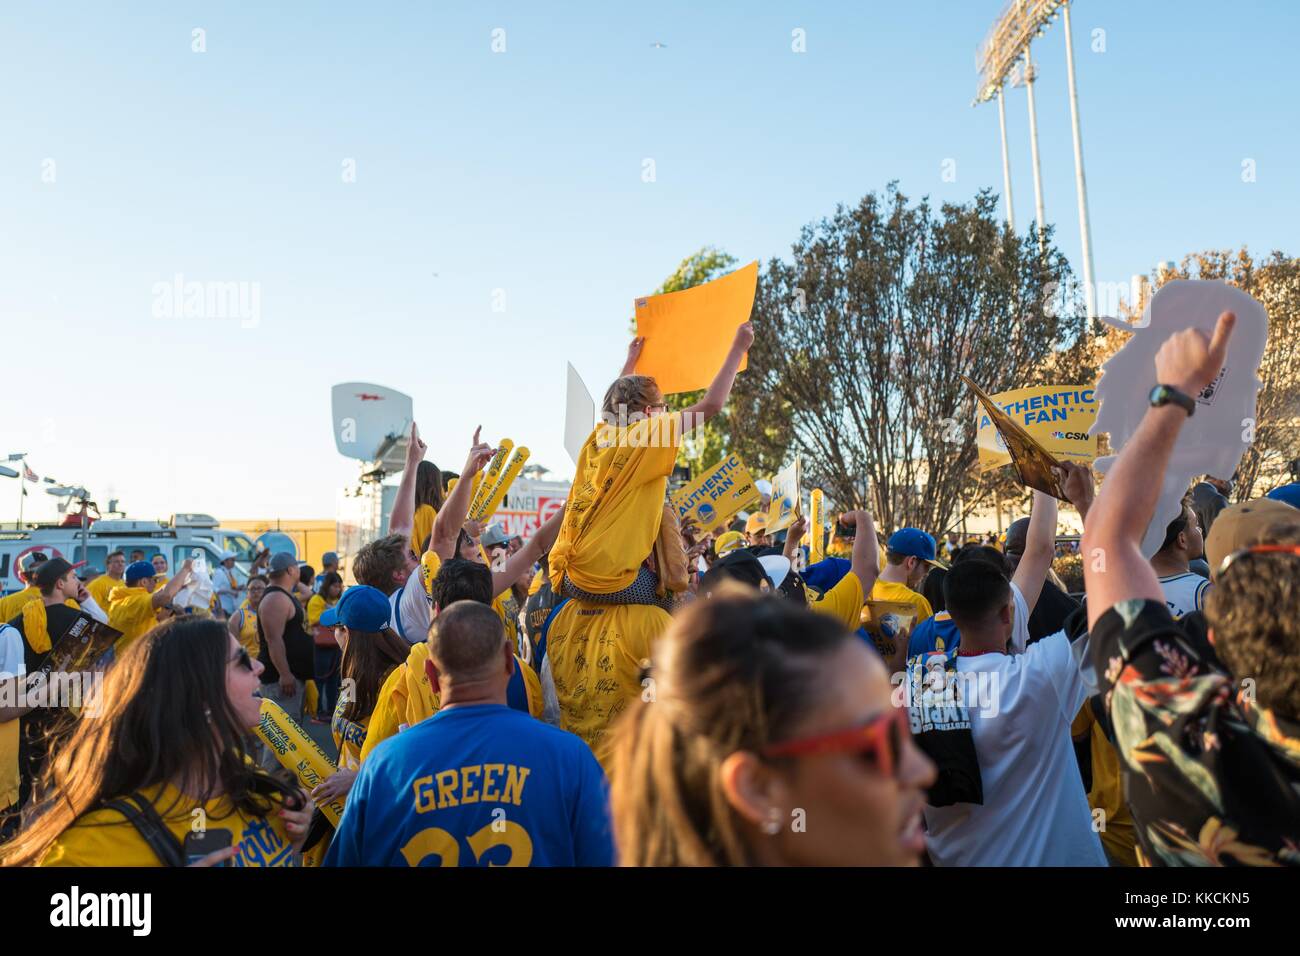 Following Game 2 of the National Basketball Association (NBA) Finals between the Golden State Warriors and the Cleveland Cavaliers, Warriors fans hold up signs, make hand gestures and celebrate their team's victory, Oakland, California, June 5, 2016. Stock Photo